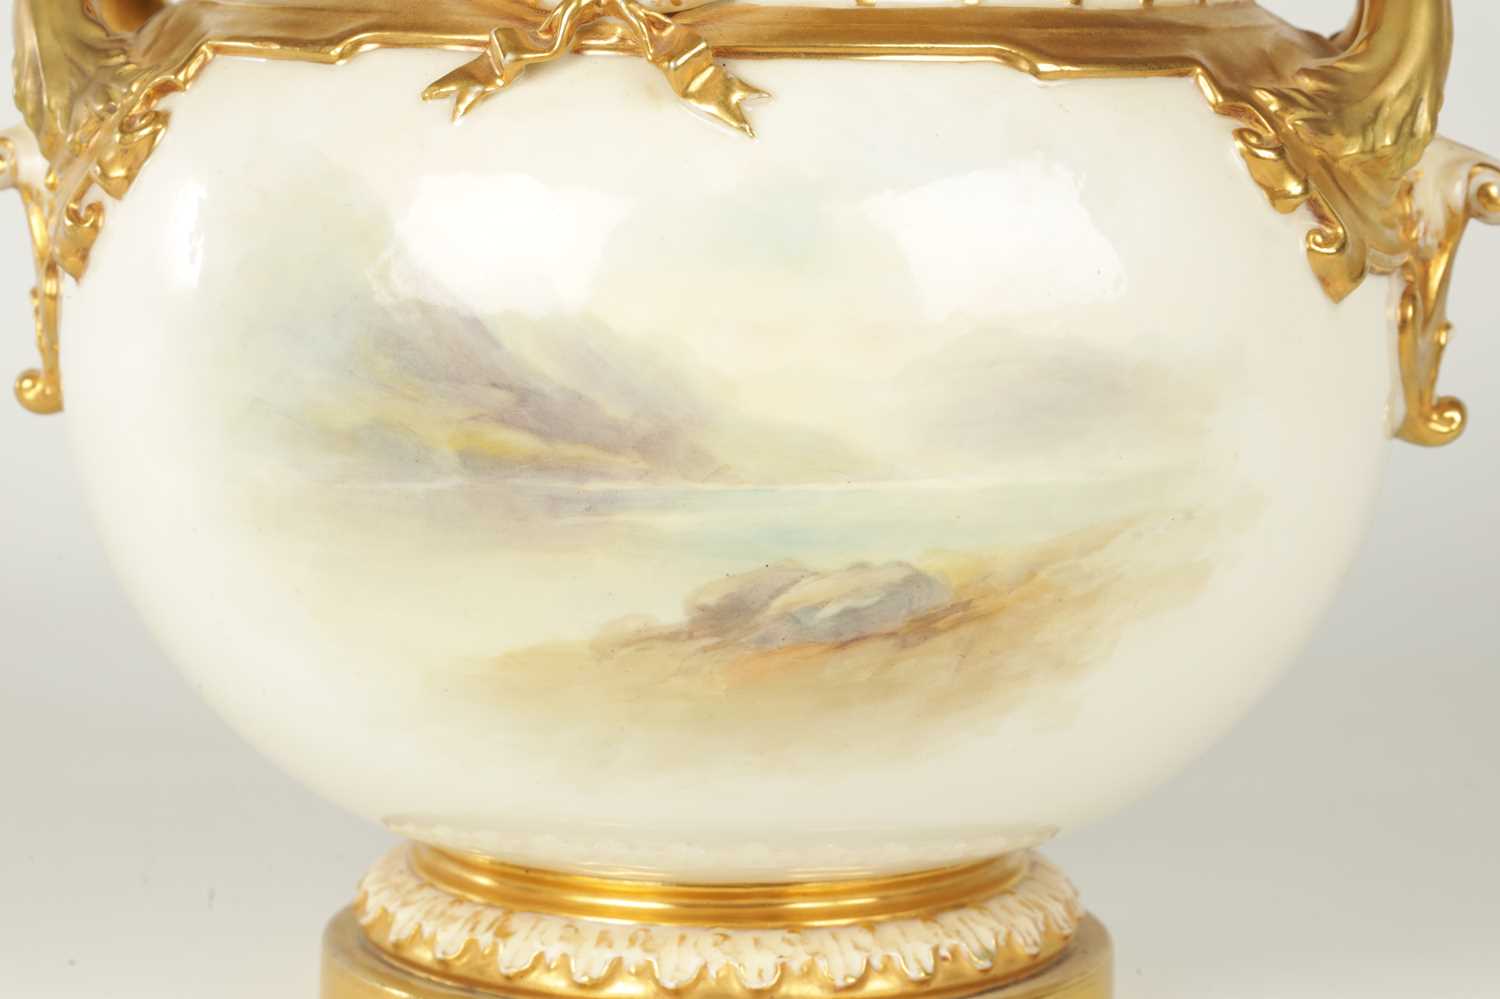 JOHN STINTON. A FINE RICHLY GILT, RELIEF MOULDED TWO HANDLED BULBOUS BLUSHED IVORY POT POURRI CABINE - Image 4 of 11